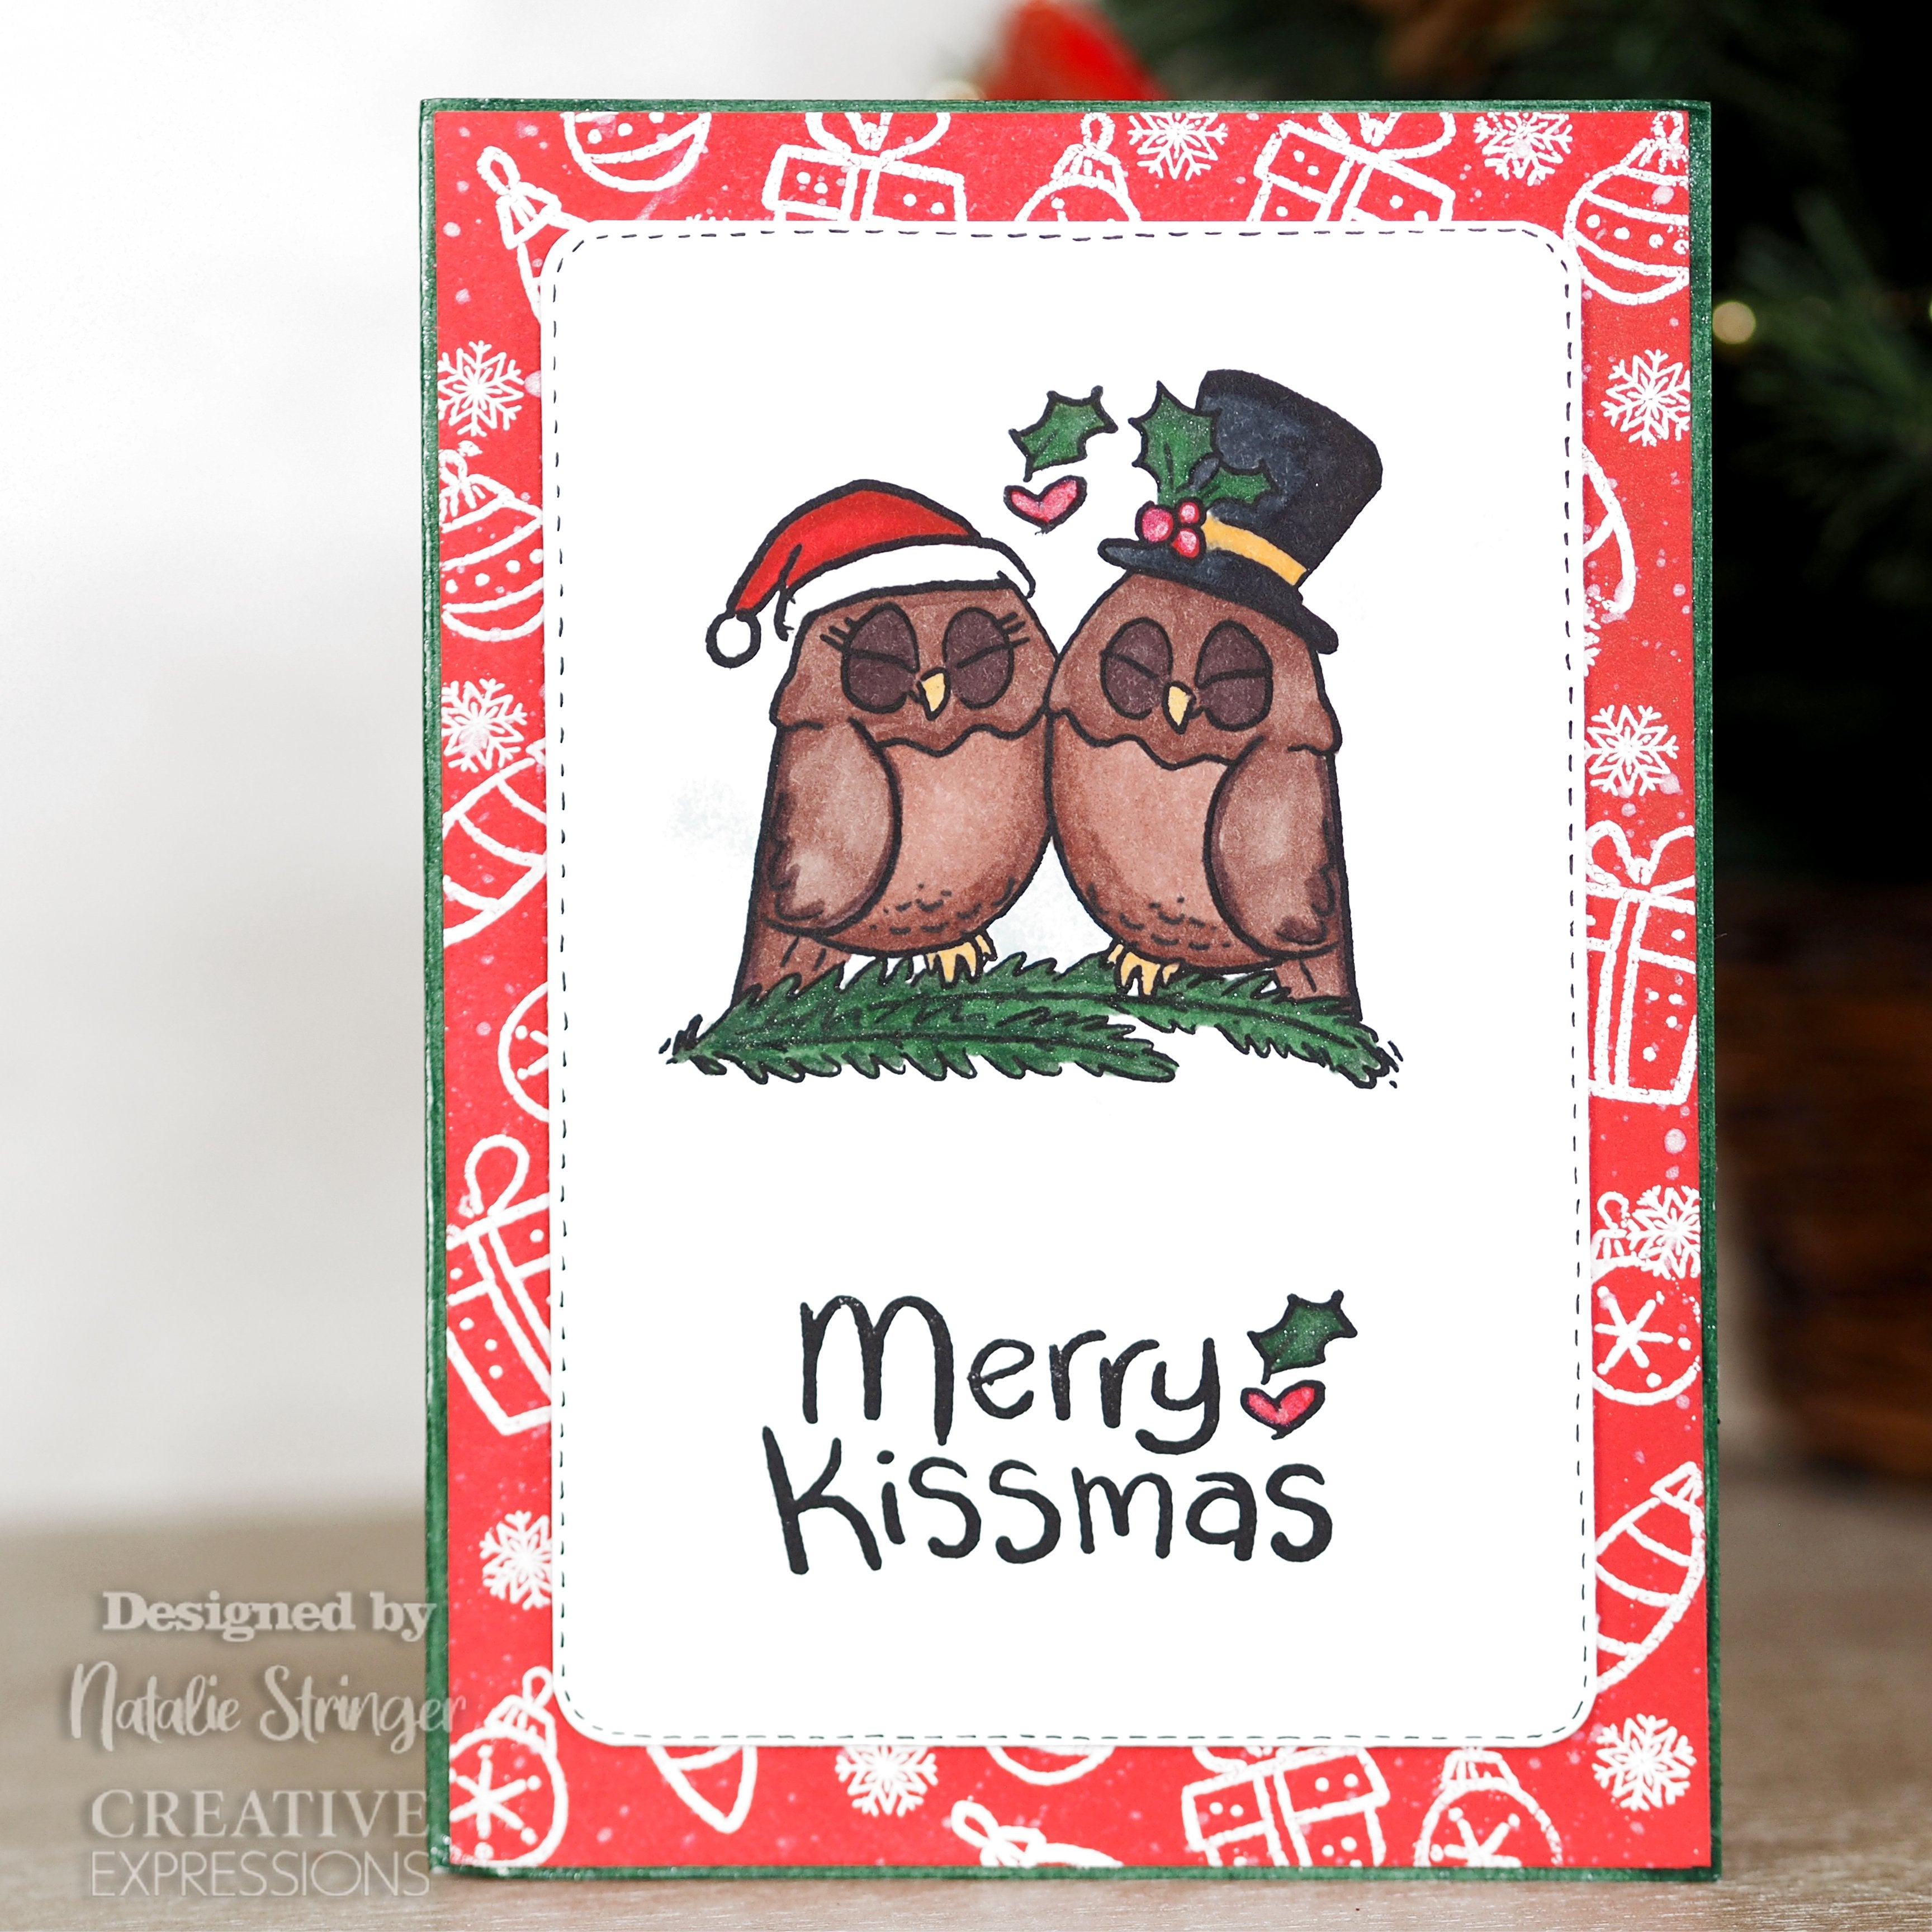 Creative Expressions Designer Boutique Collection Merry Kissmas A6 Clear Stamp Set